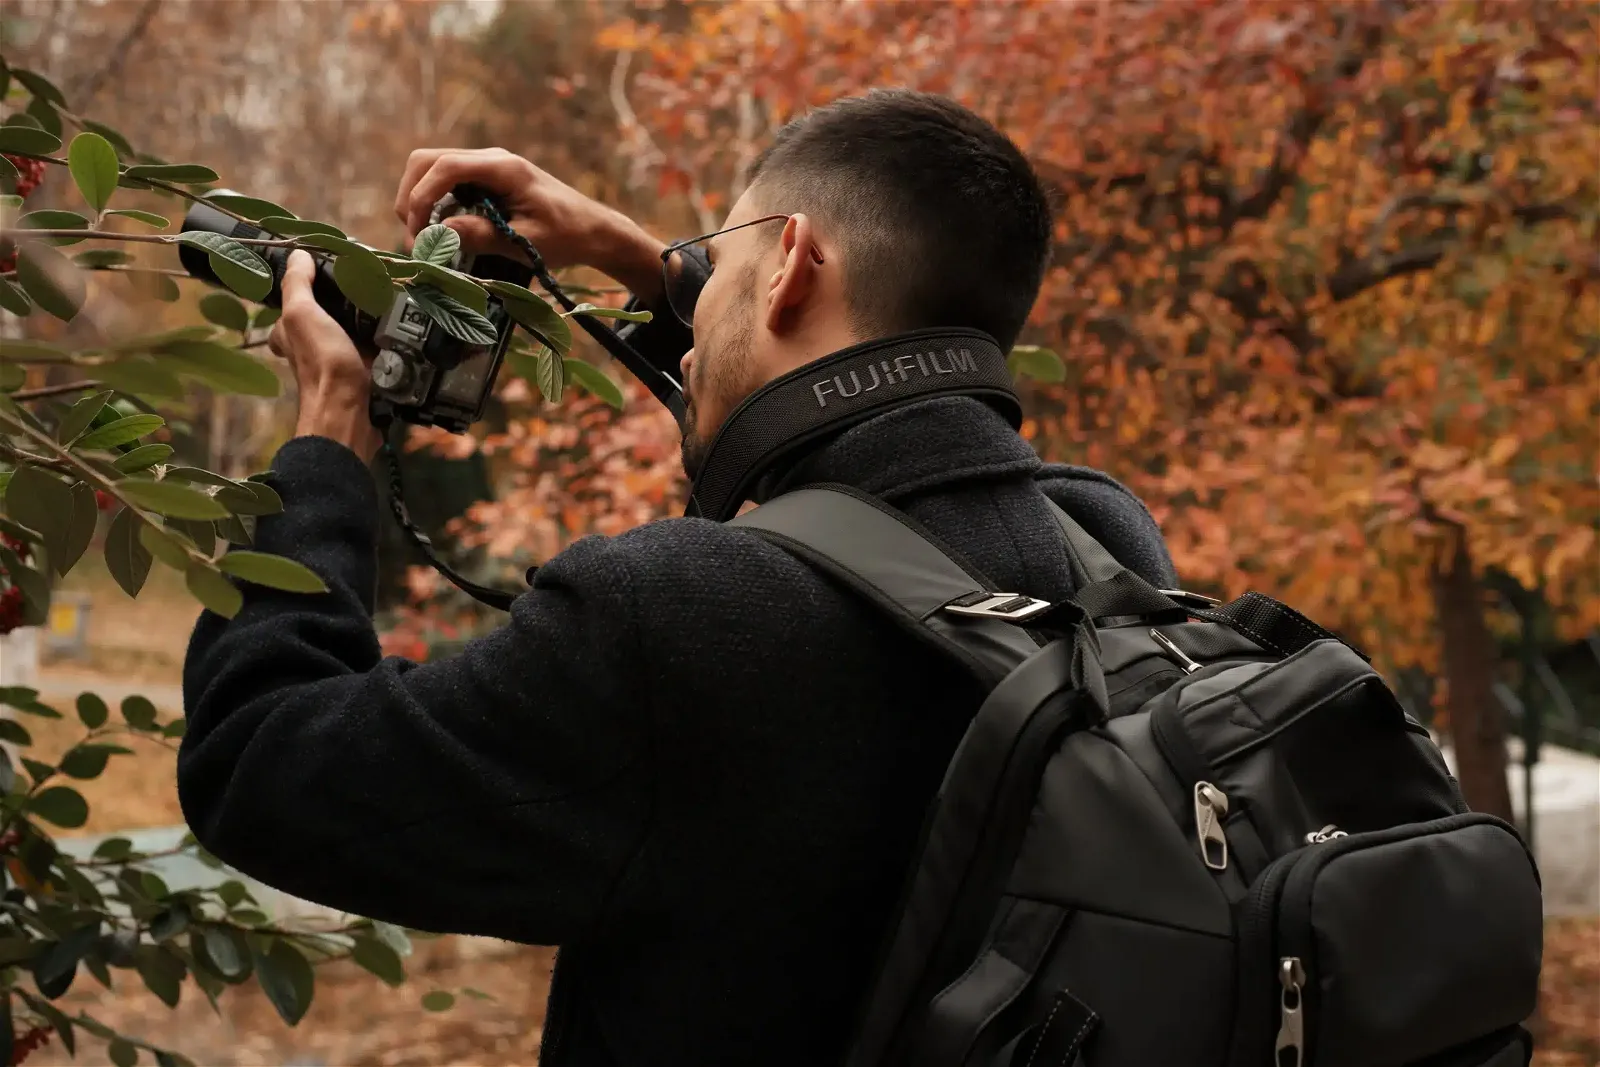 Best Vlogging Backpack for Keeping Your Gear Safe and Organized